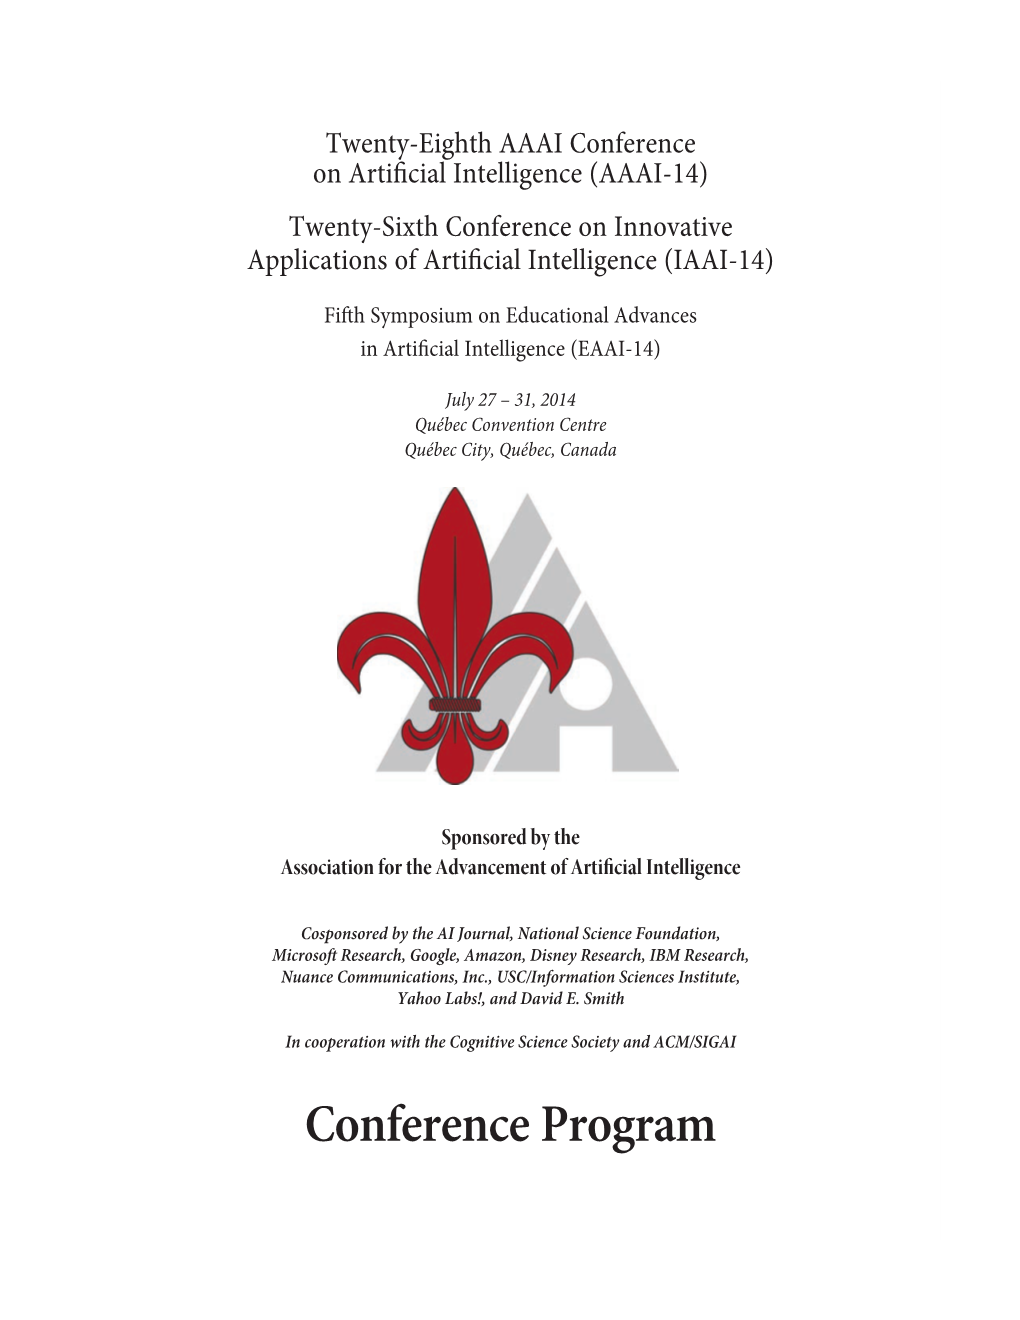 Conference Program Contents AAAI-14 Conference Committee